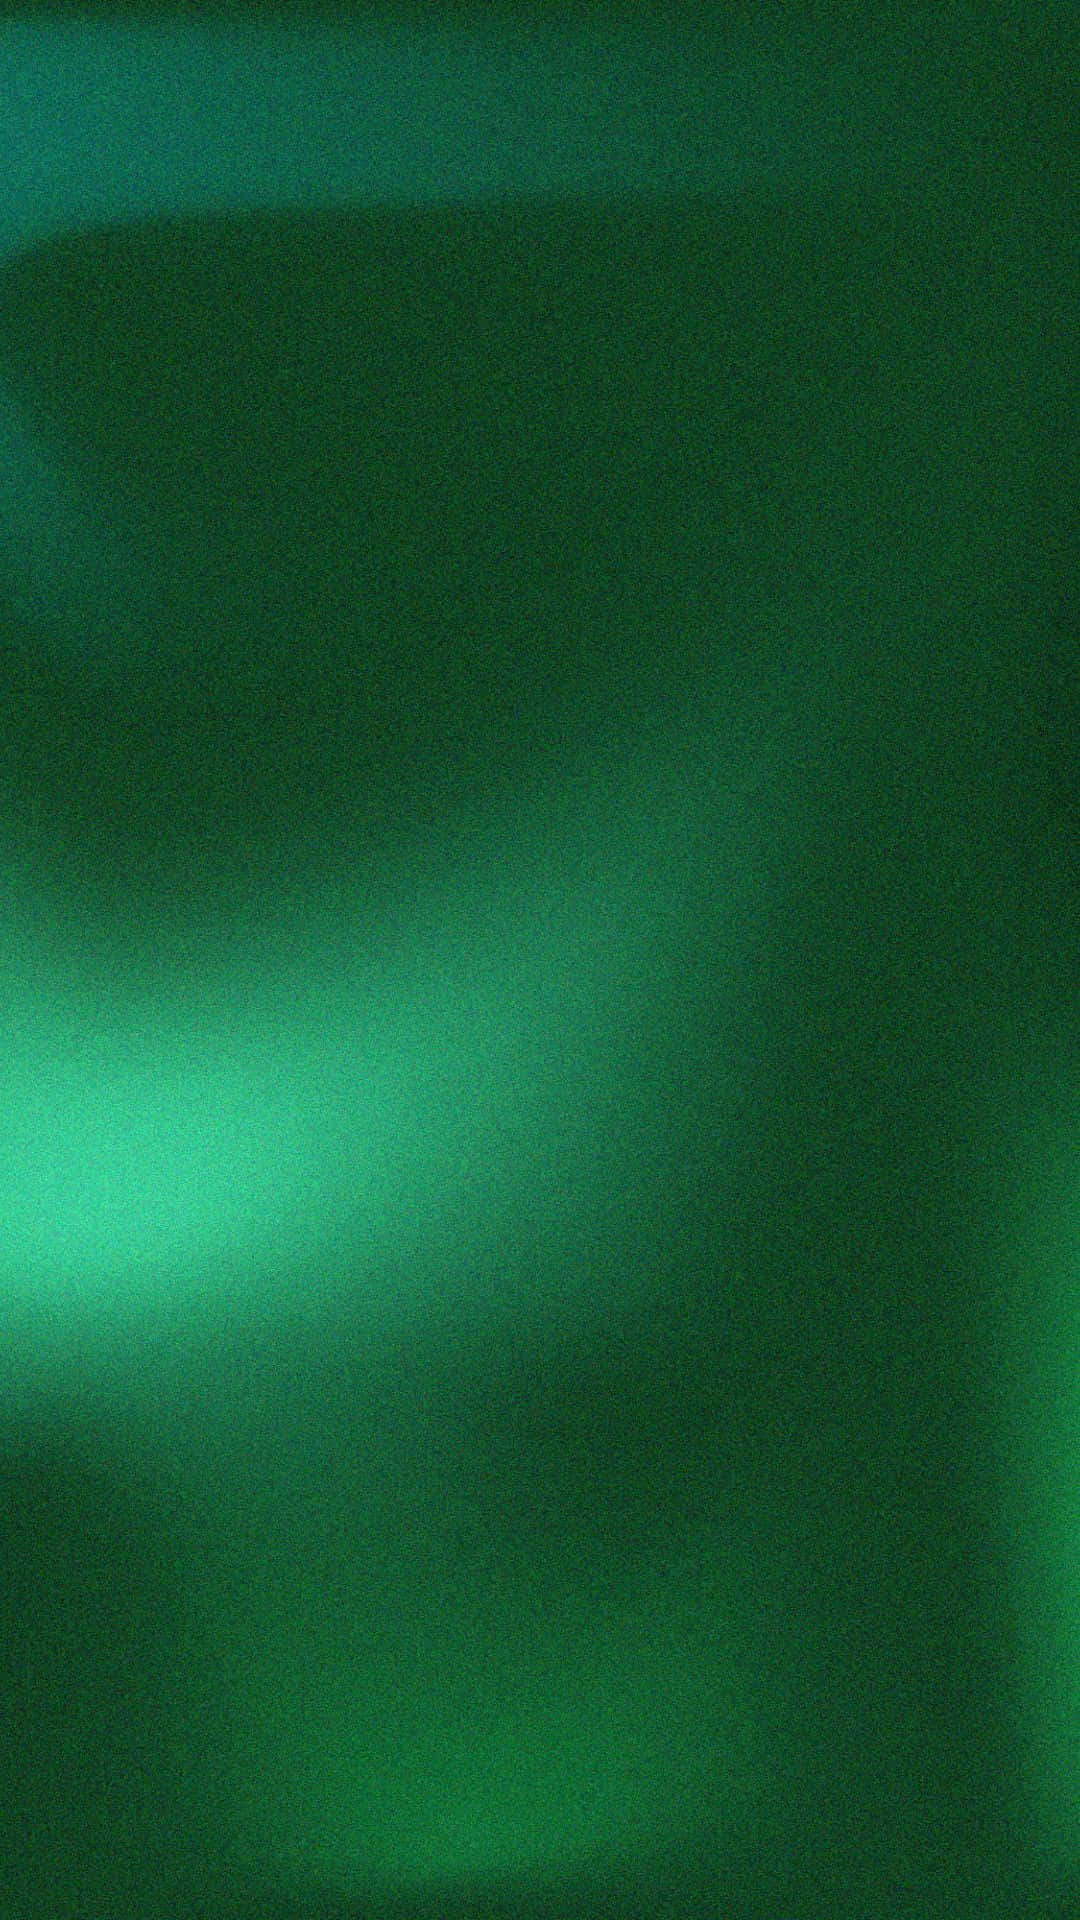 An abstract gradient of vibrant green shades.